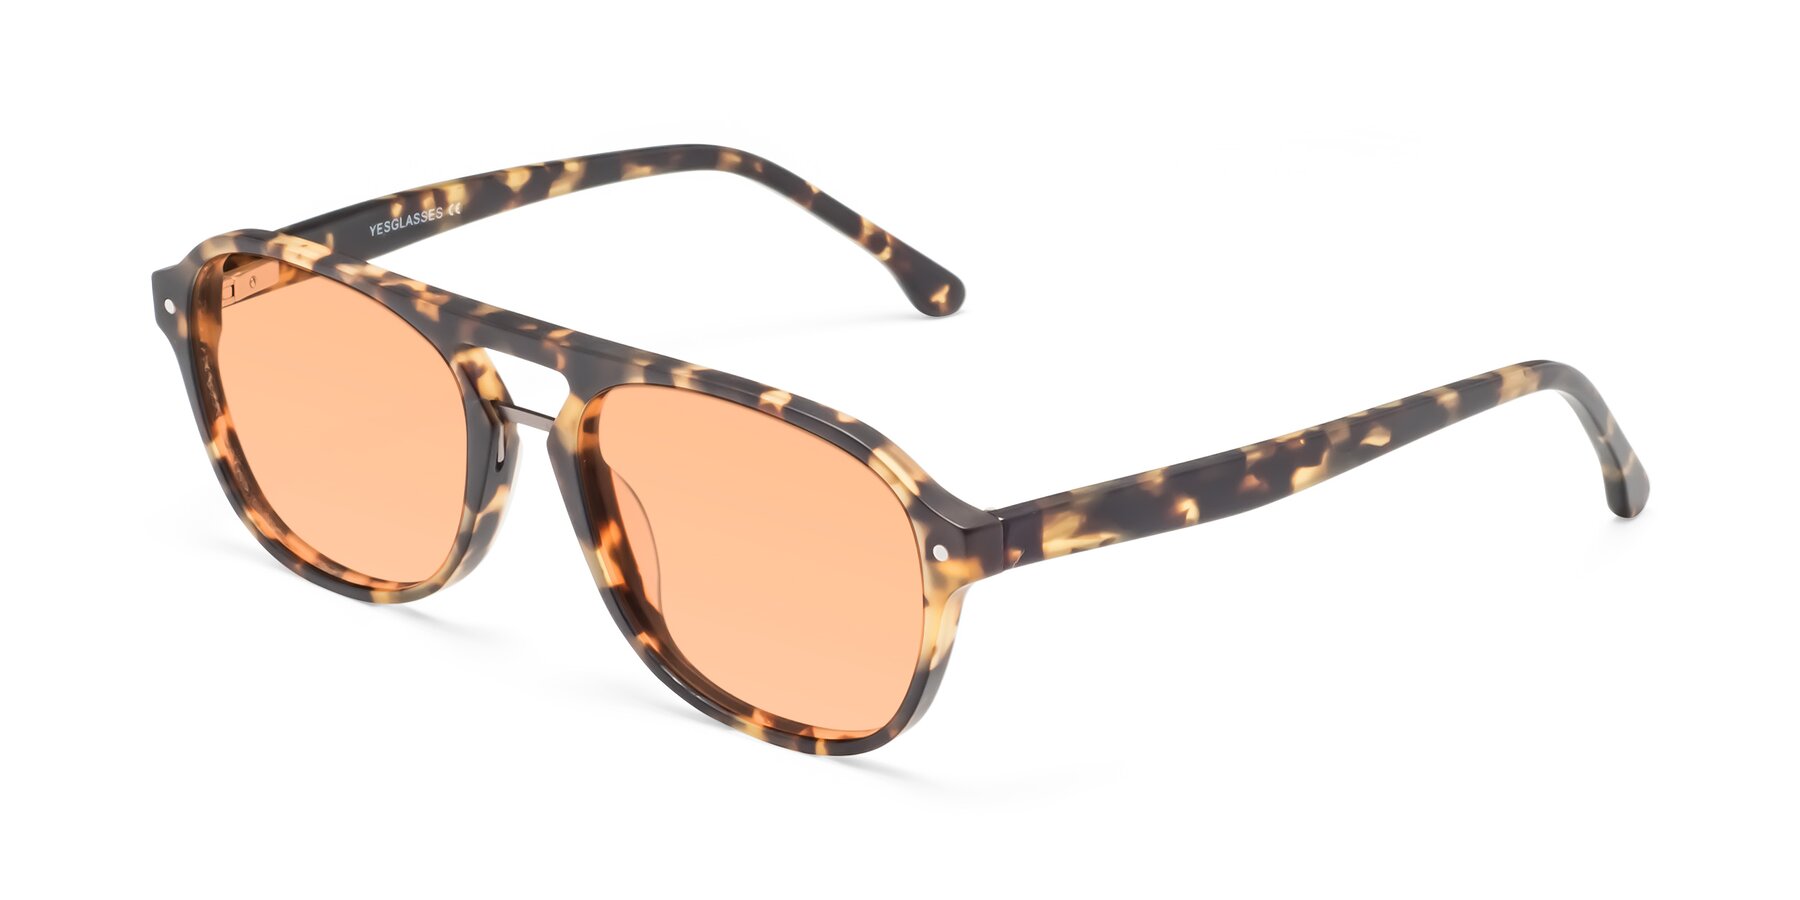 Angle of 17416 in Matte Tortoise with Light Orange Tinted Lenses